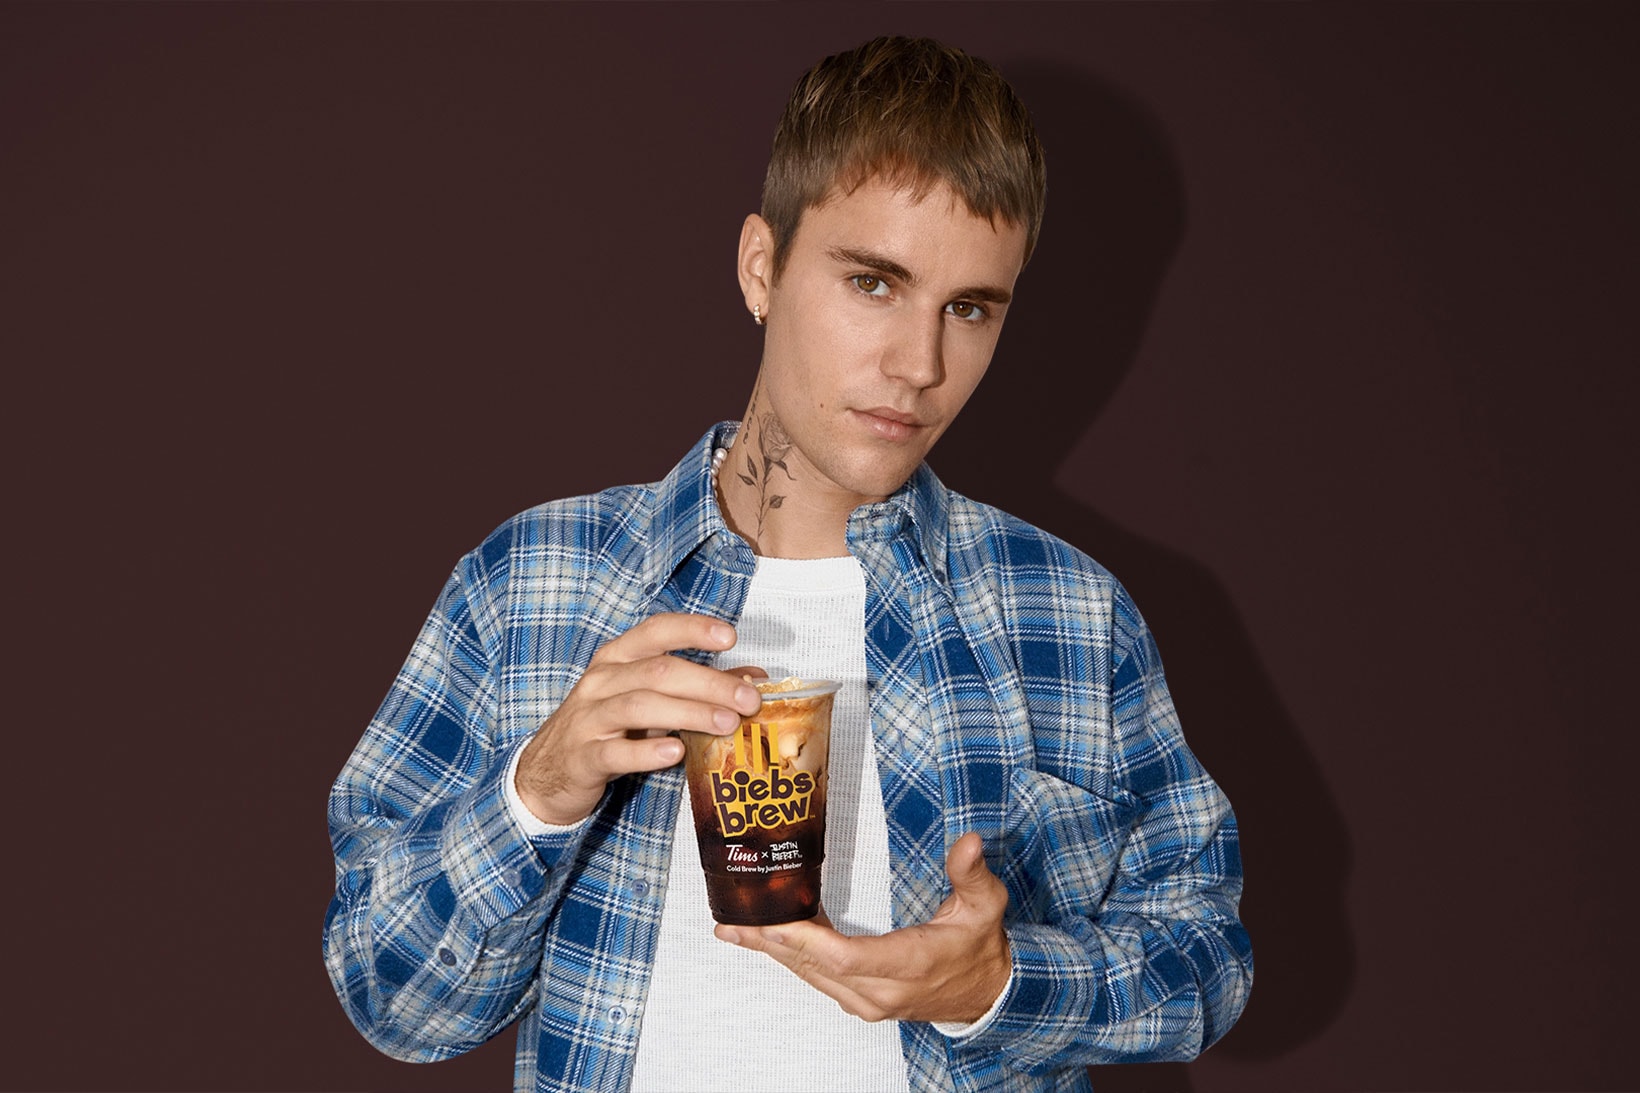 Justin Bieber Tim Hortons Biebs Brew Coffee French Vanilla Launch Where to buy